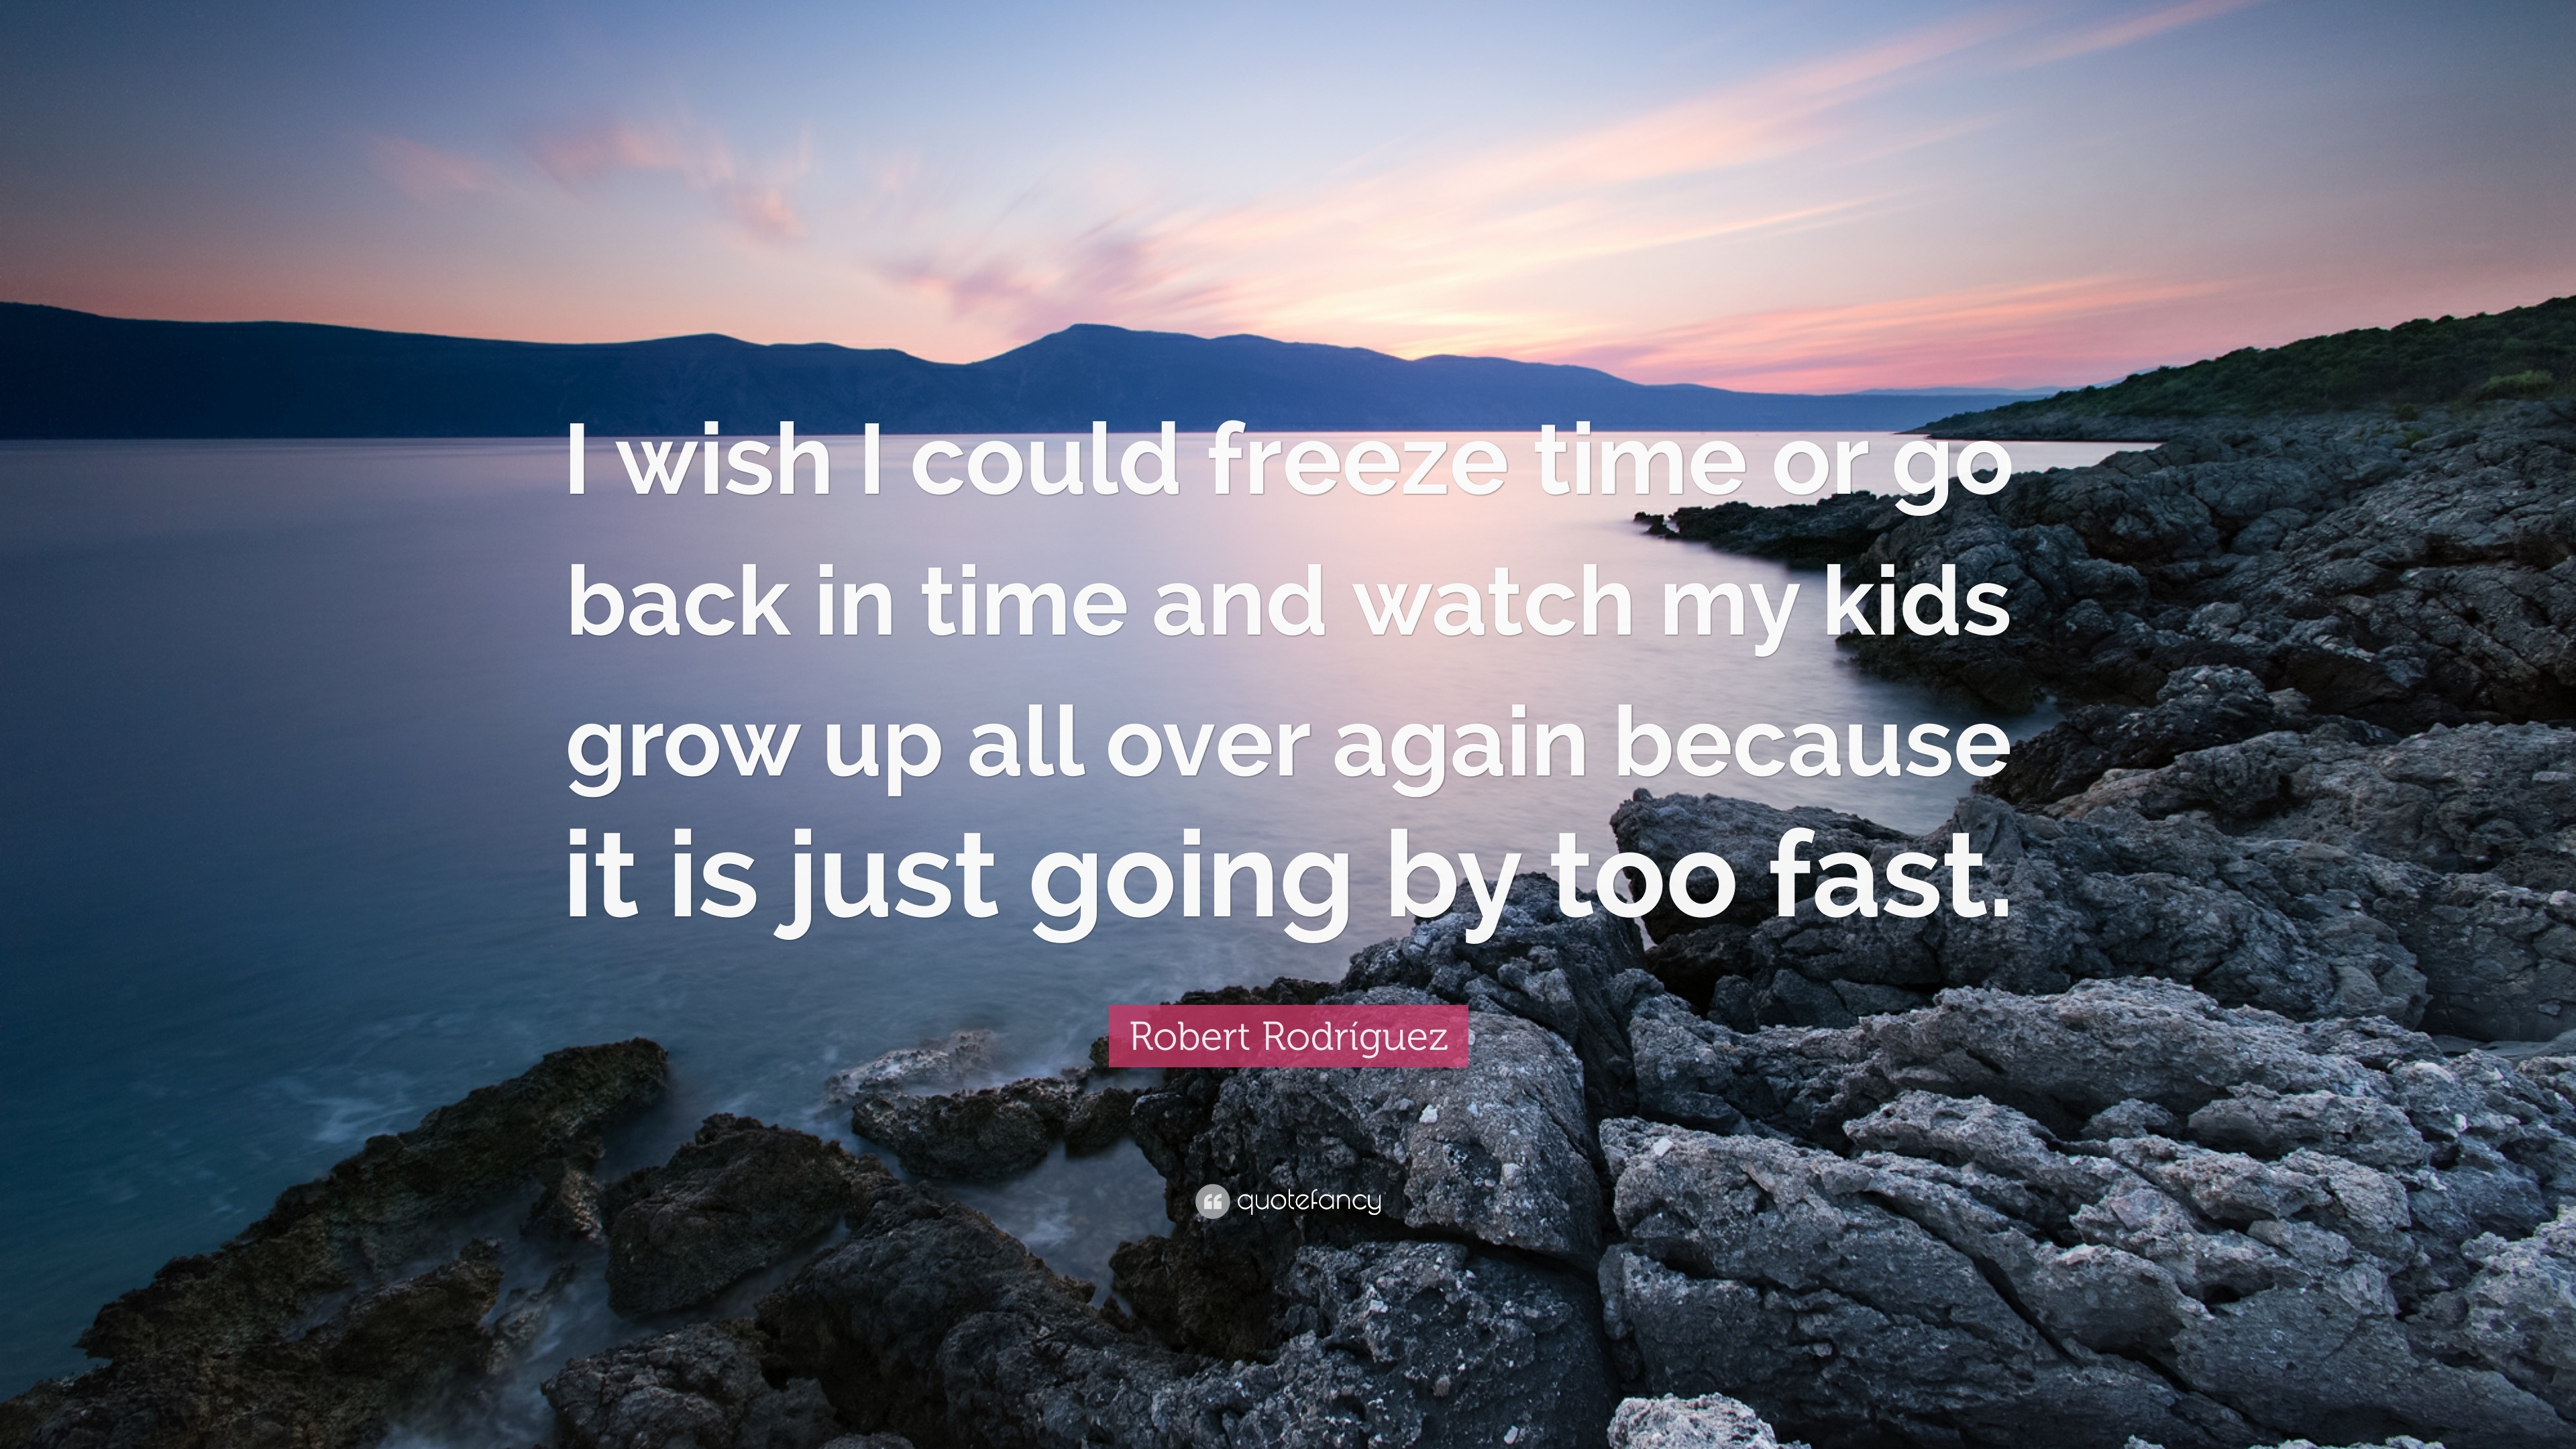 growing up too fast quotes tumblr